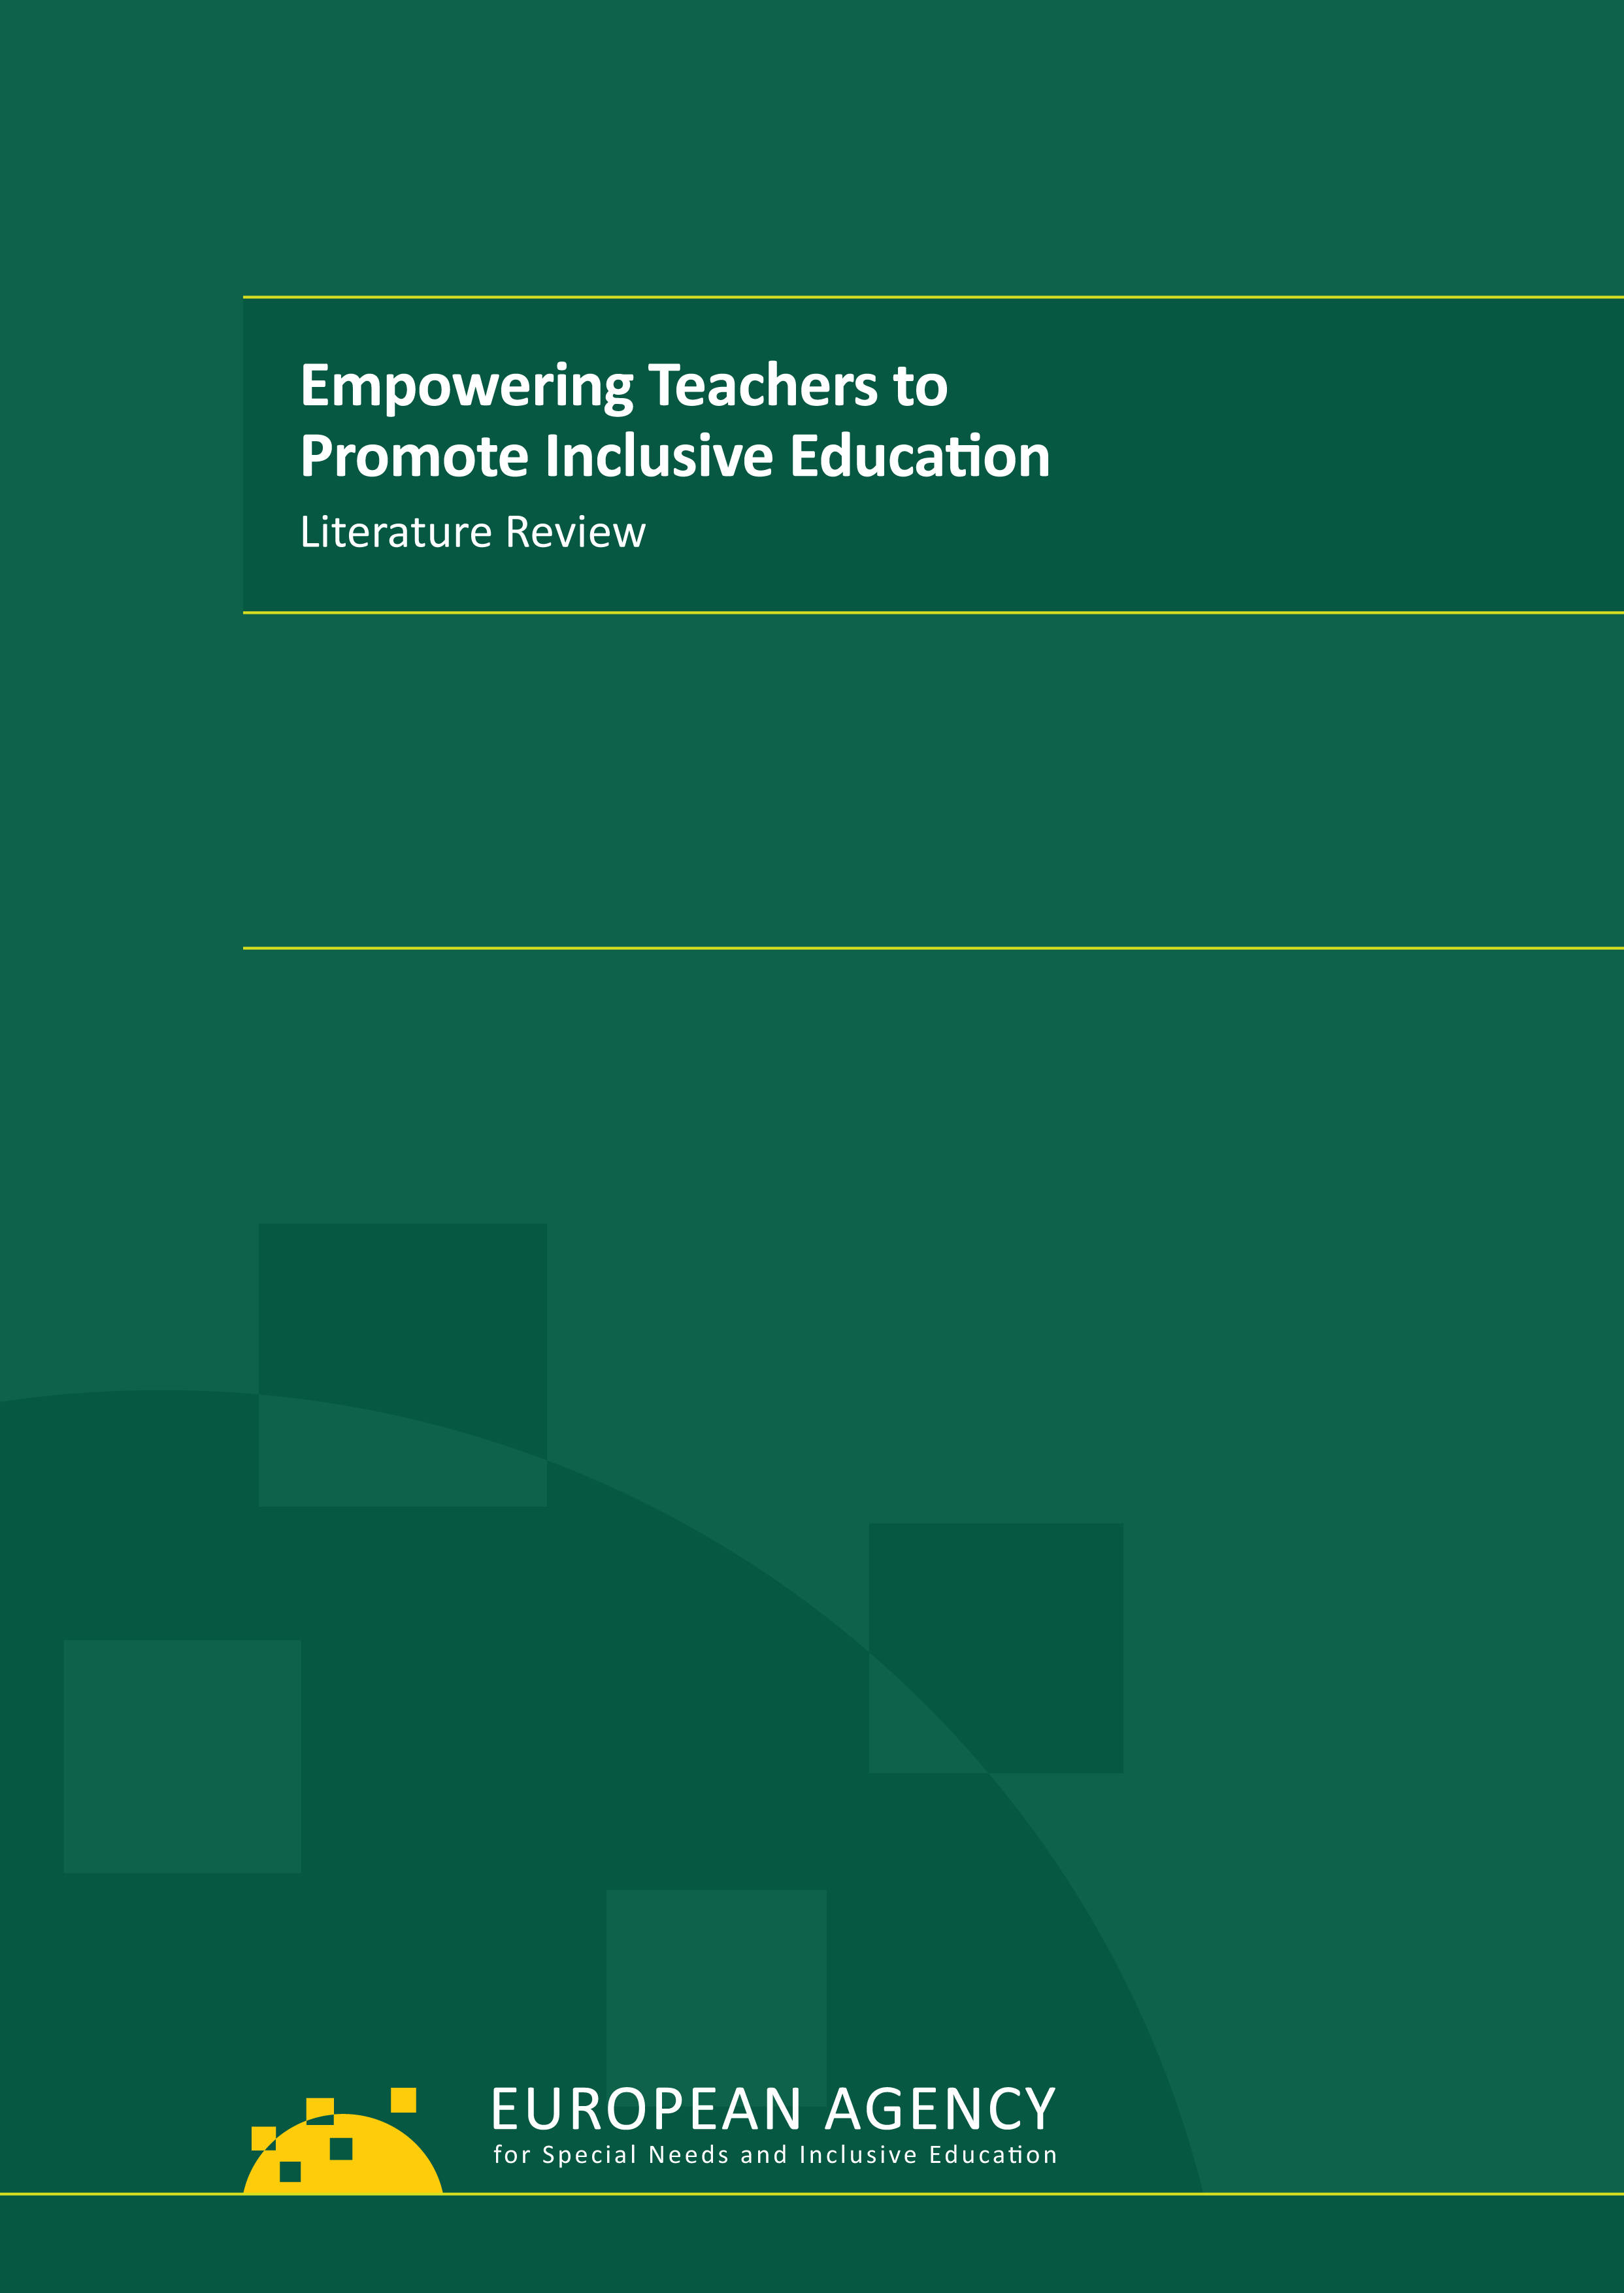 Empowering Teachers to Promote Inclusive Education – Literature Review